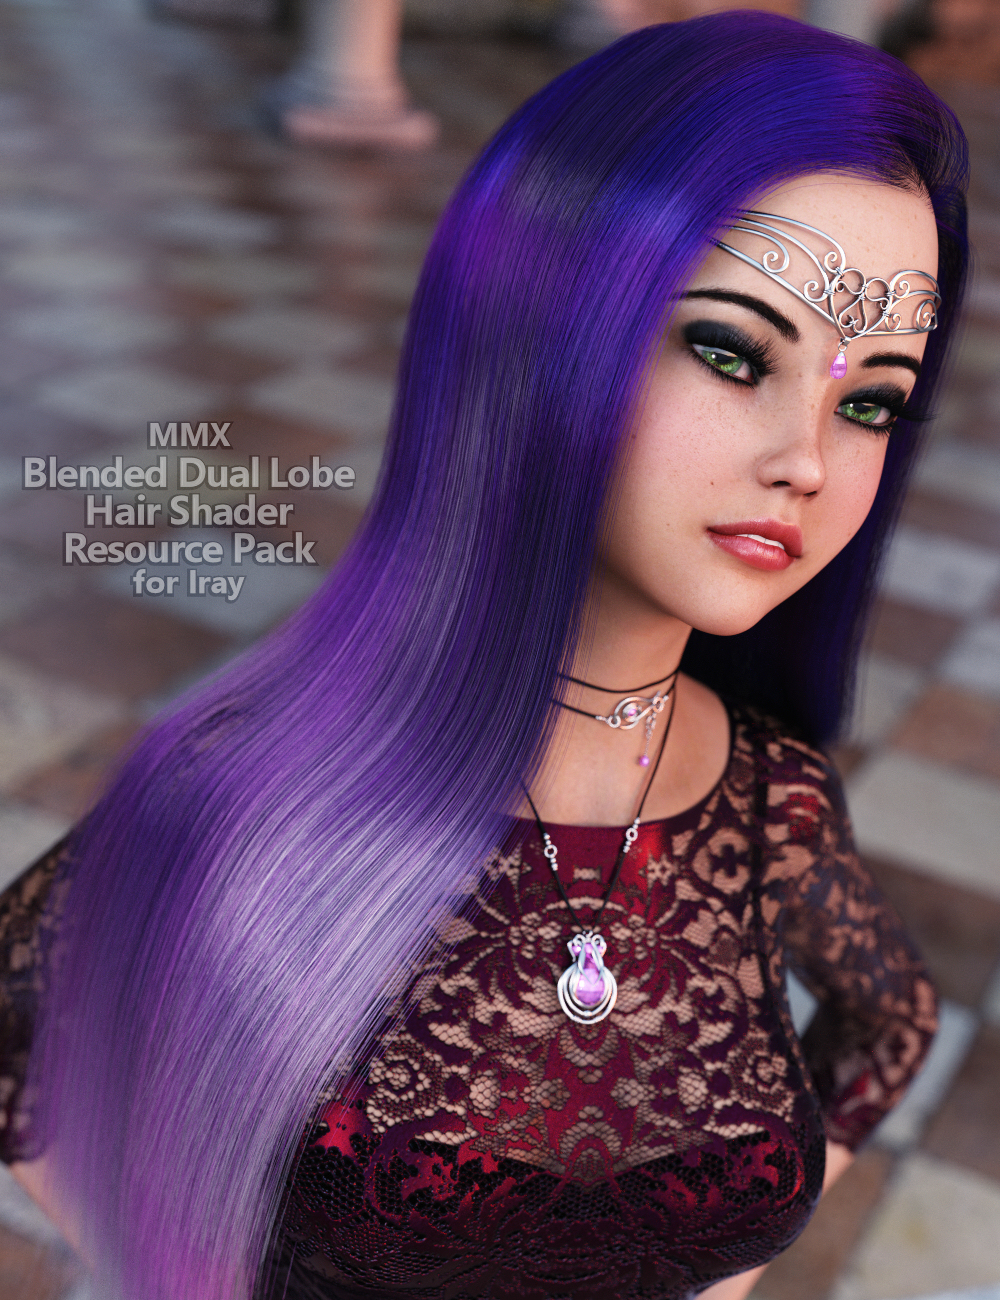 MMX Blended Dual Lobe Hair Shader Resource Pack for Iray by: Mattymanx, 3D Models by Daz 3D